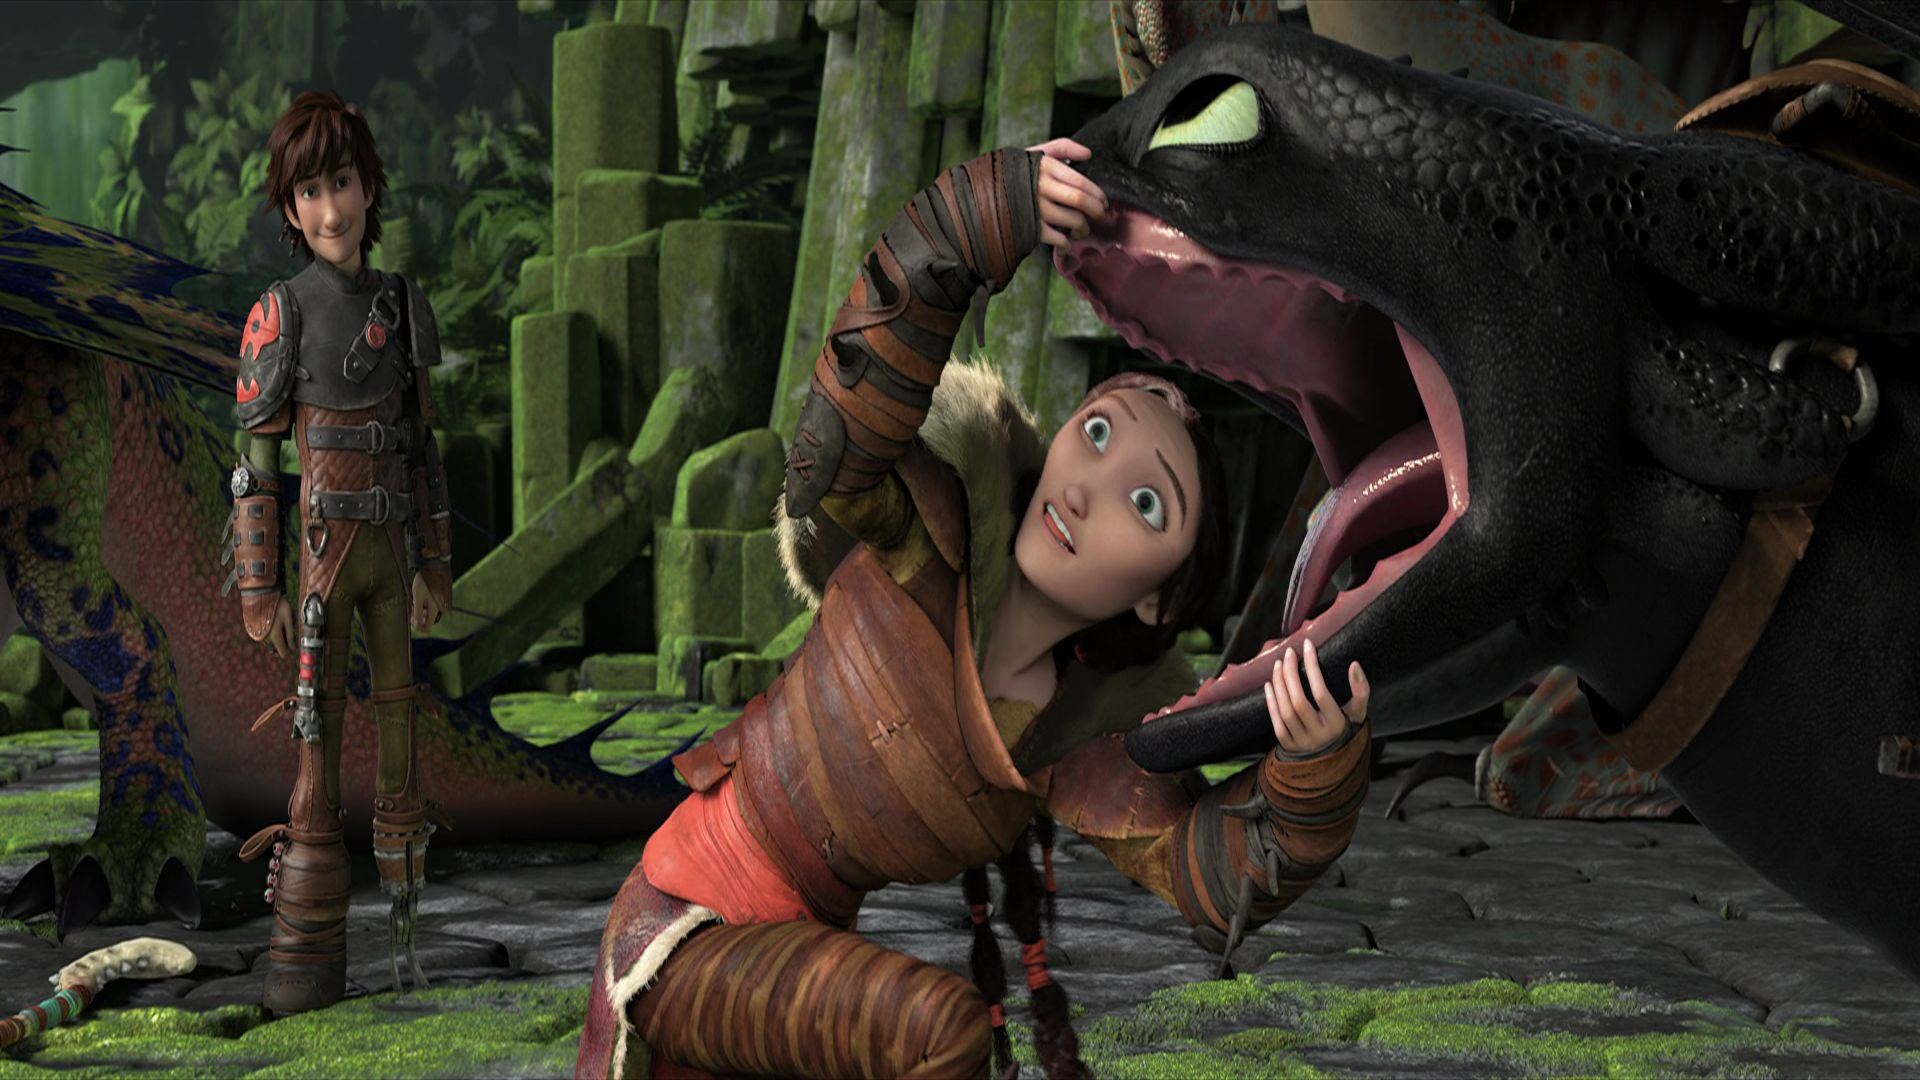 movie, how to train your dragon 2, hiccup (how to train your dragon), toothless (how to train your dragon), valka (how to train your dragon), how to train your dragon